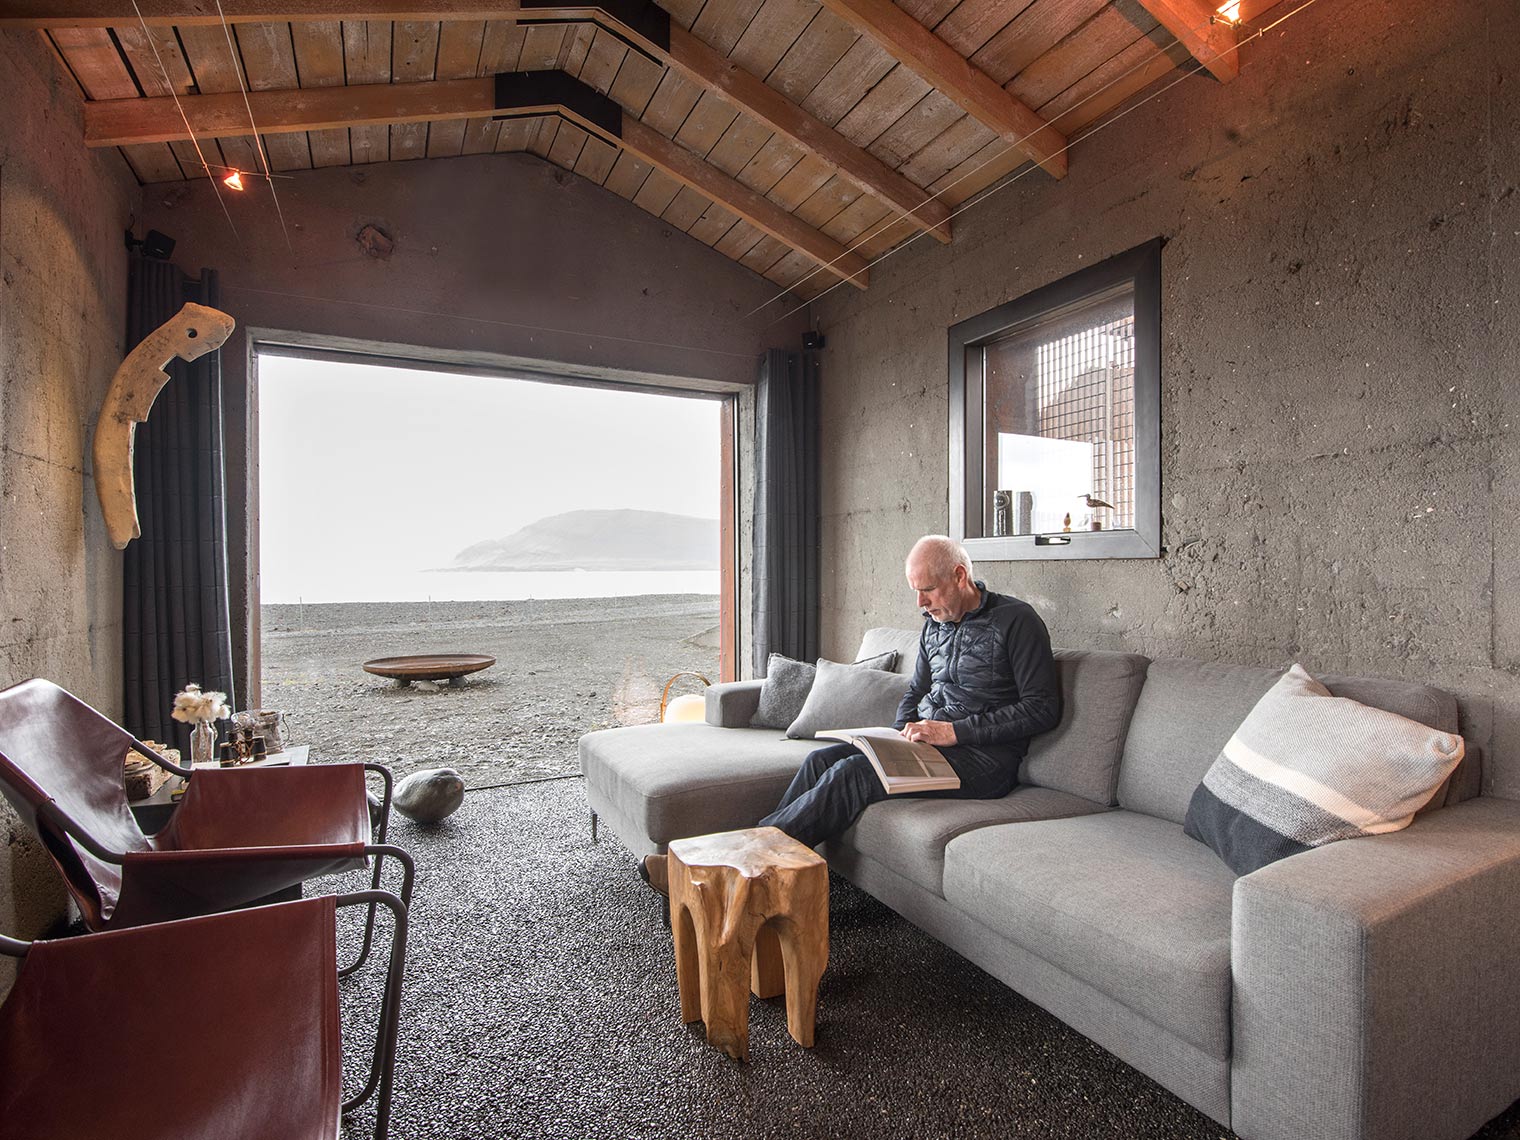 Concrete Factory Turned Into A Vacation Cabin: Westfjords, Iceland - PKdM Architects